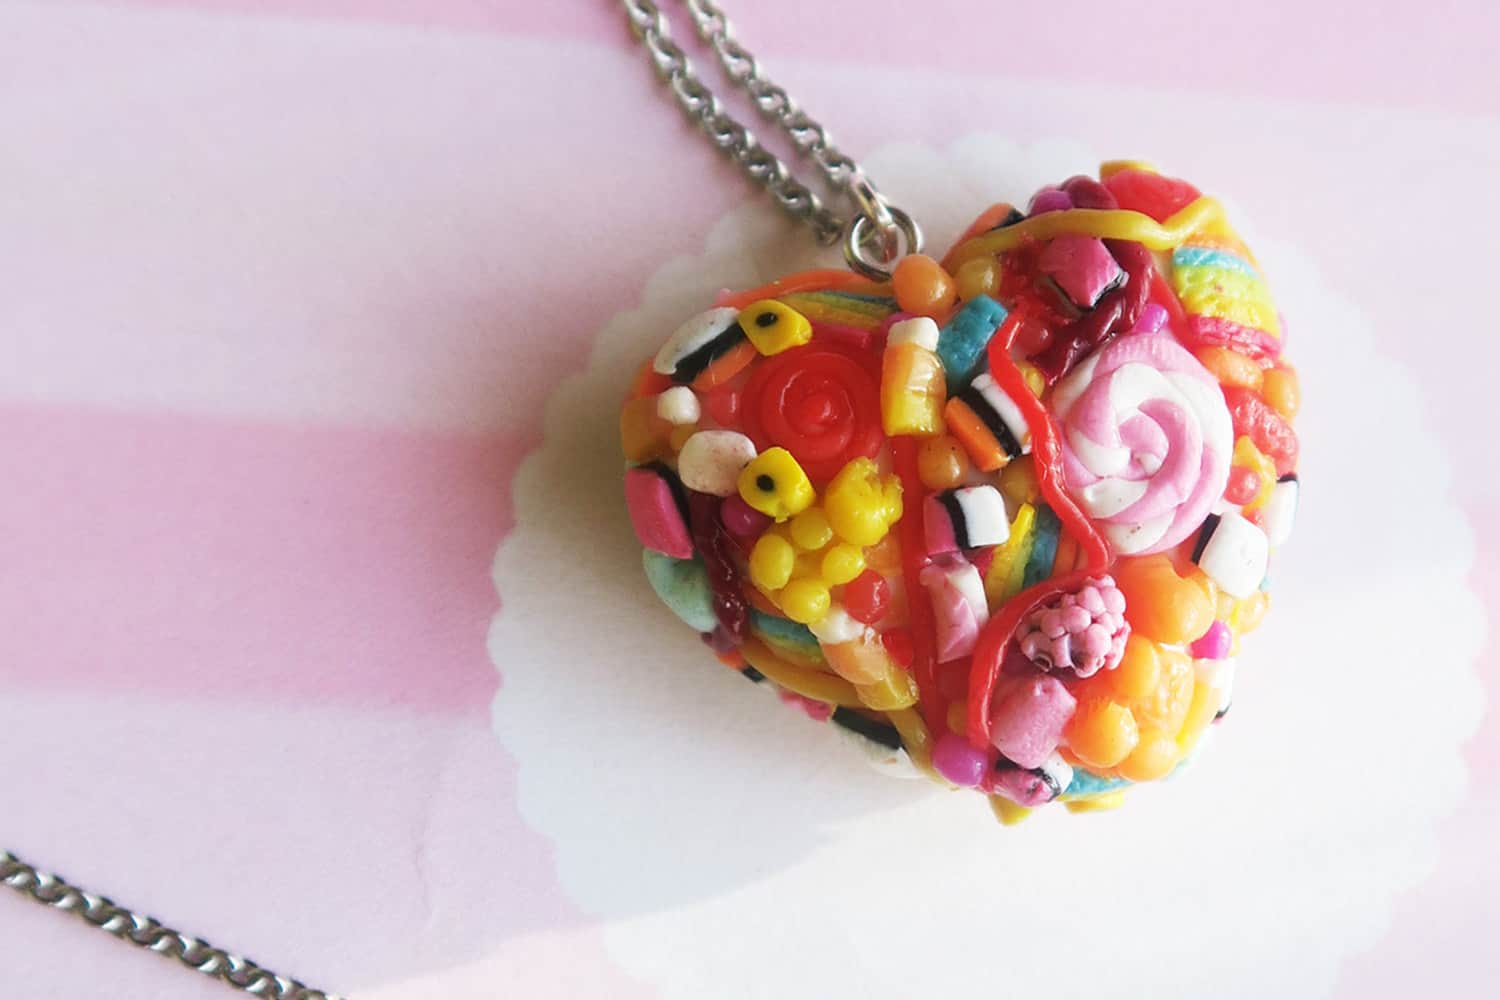 Candy heart necklace